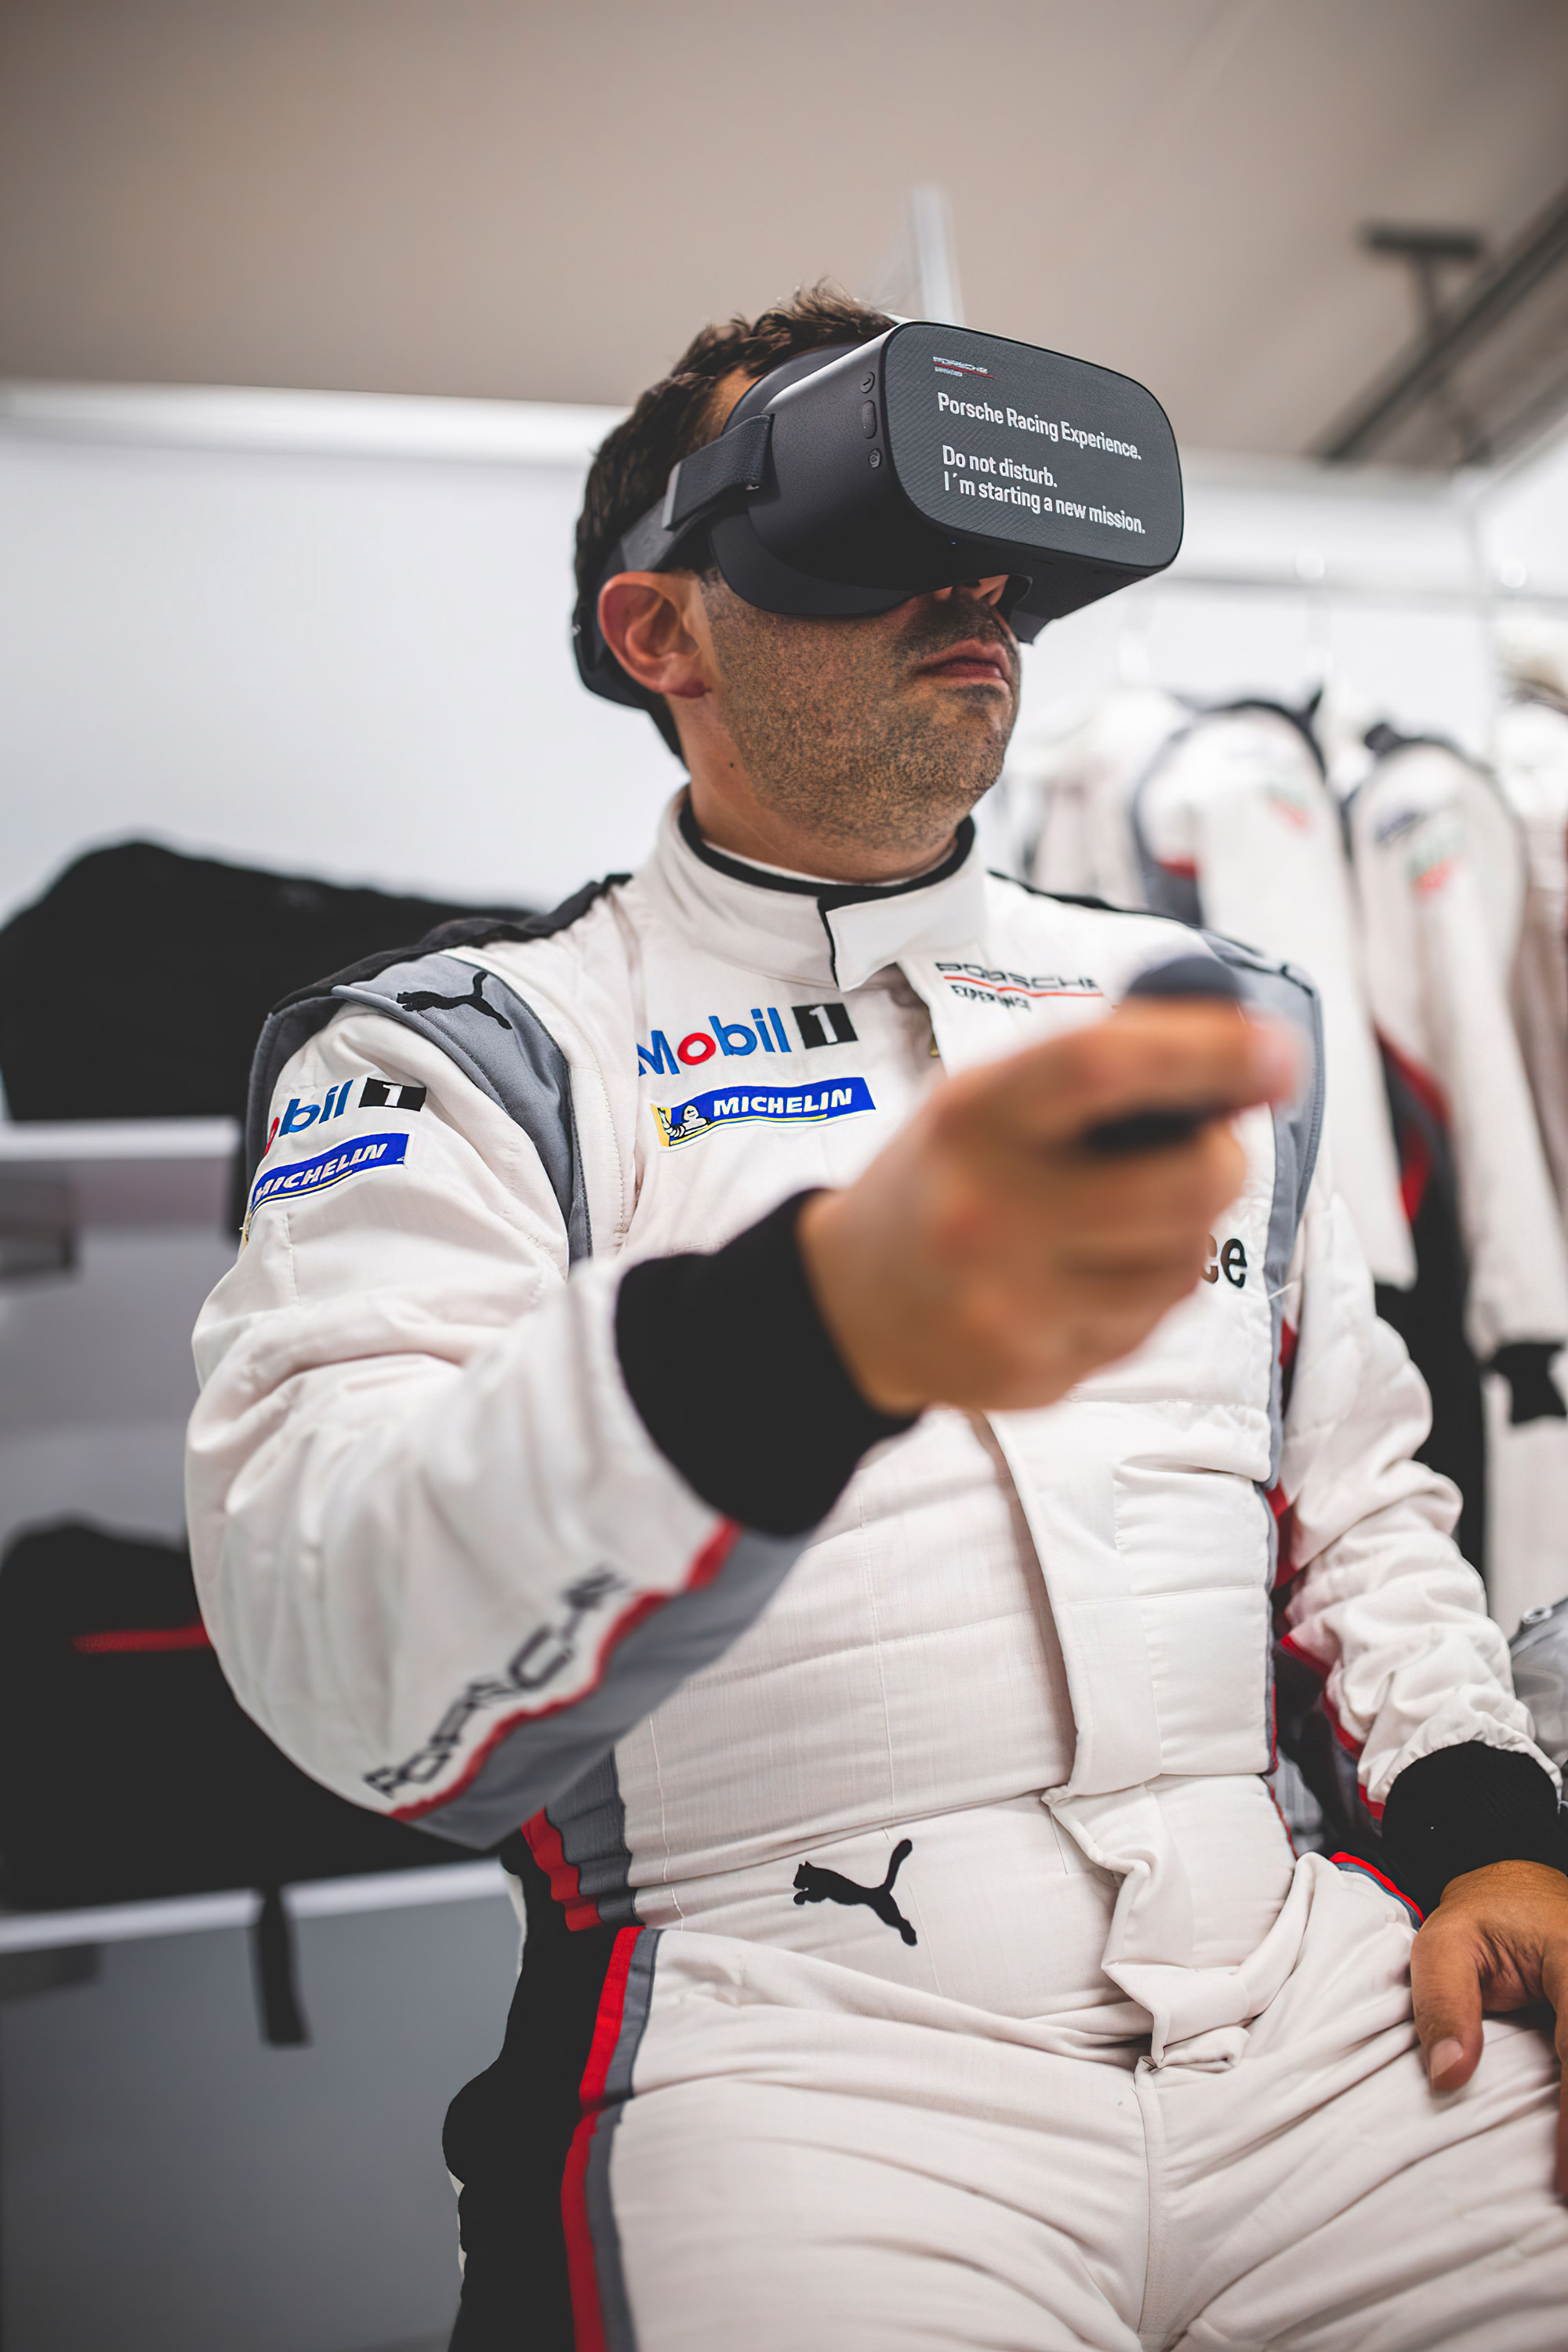 Participant of the Porsche Racing Experience practicing with VR glasses